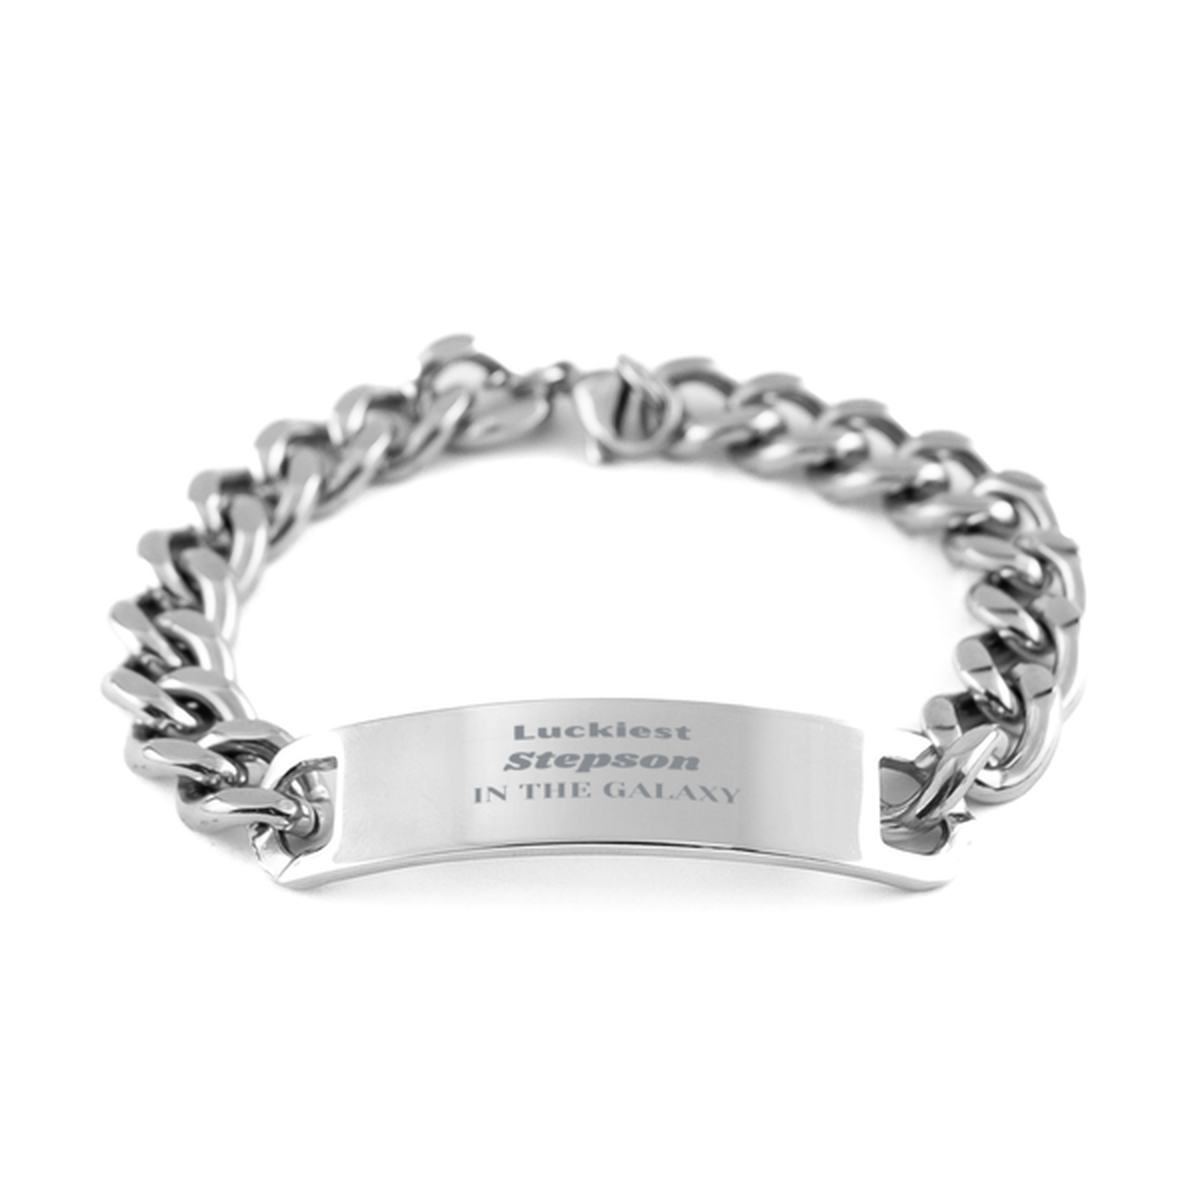 Luckiest Stepson in the Galaxy, To My Stepson Engraved Gifts, Christmas Stepson Cuban Chain Stainless Steel Bracelet Gifts, X-mas Birthday Unique Gifts For Stepson Men Women